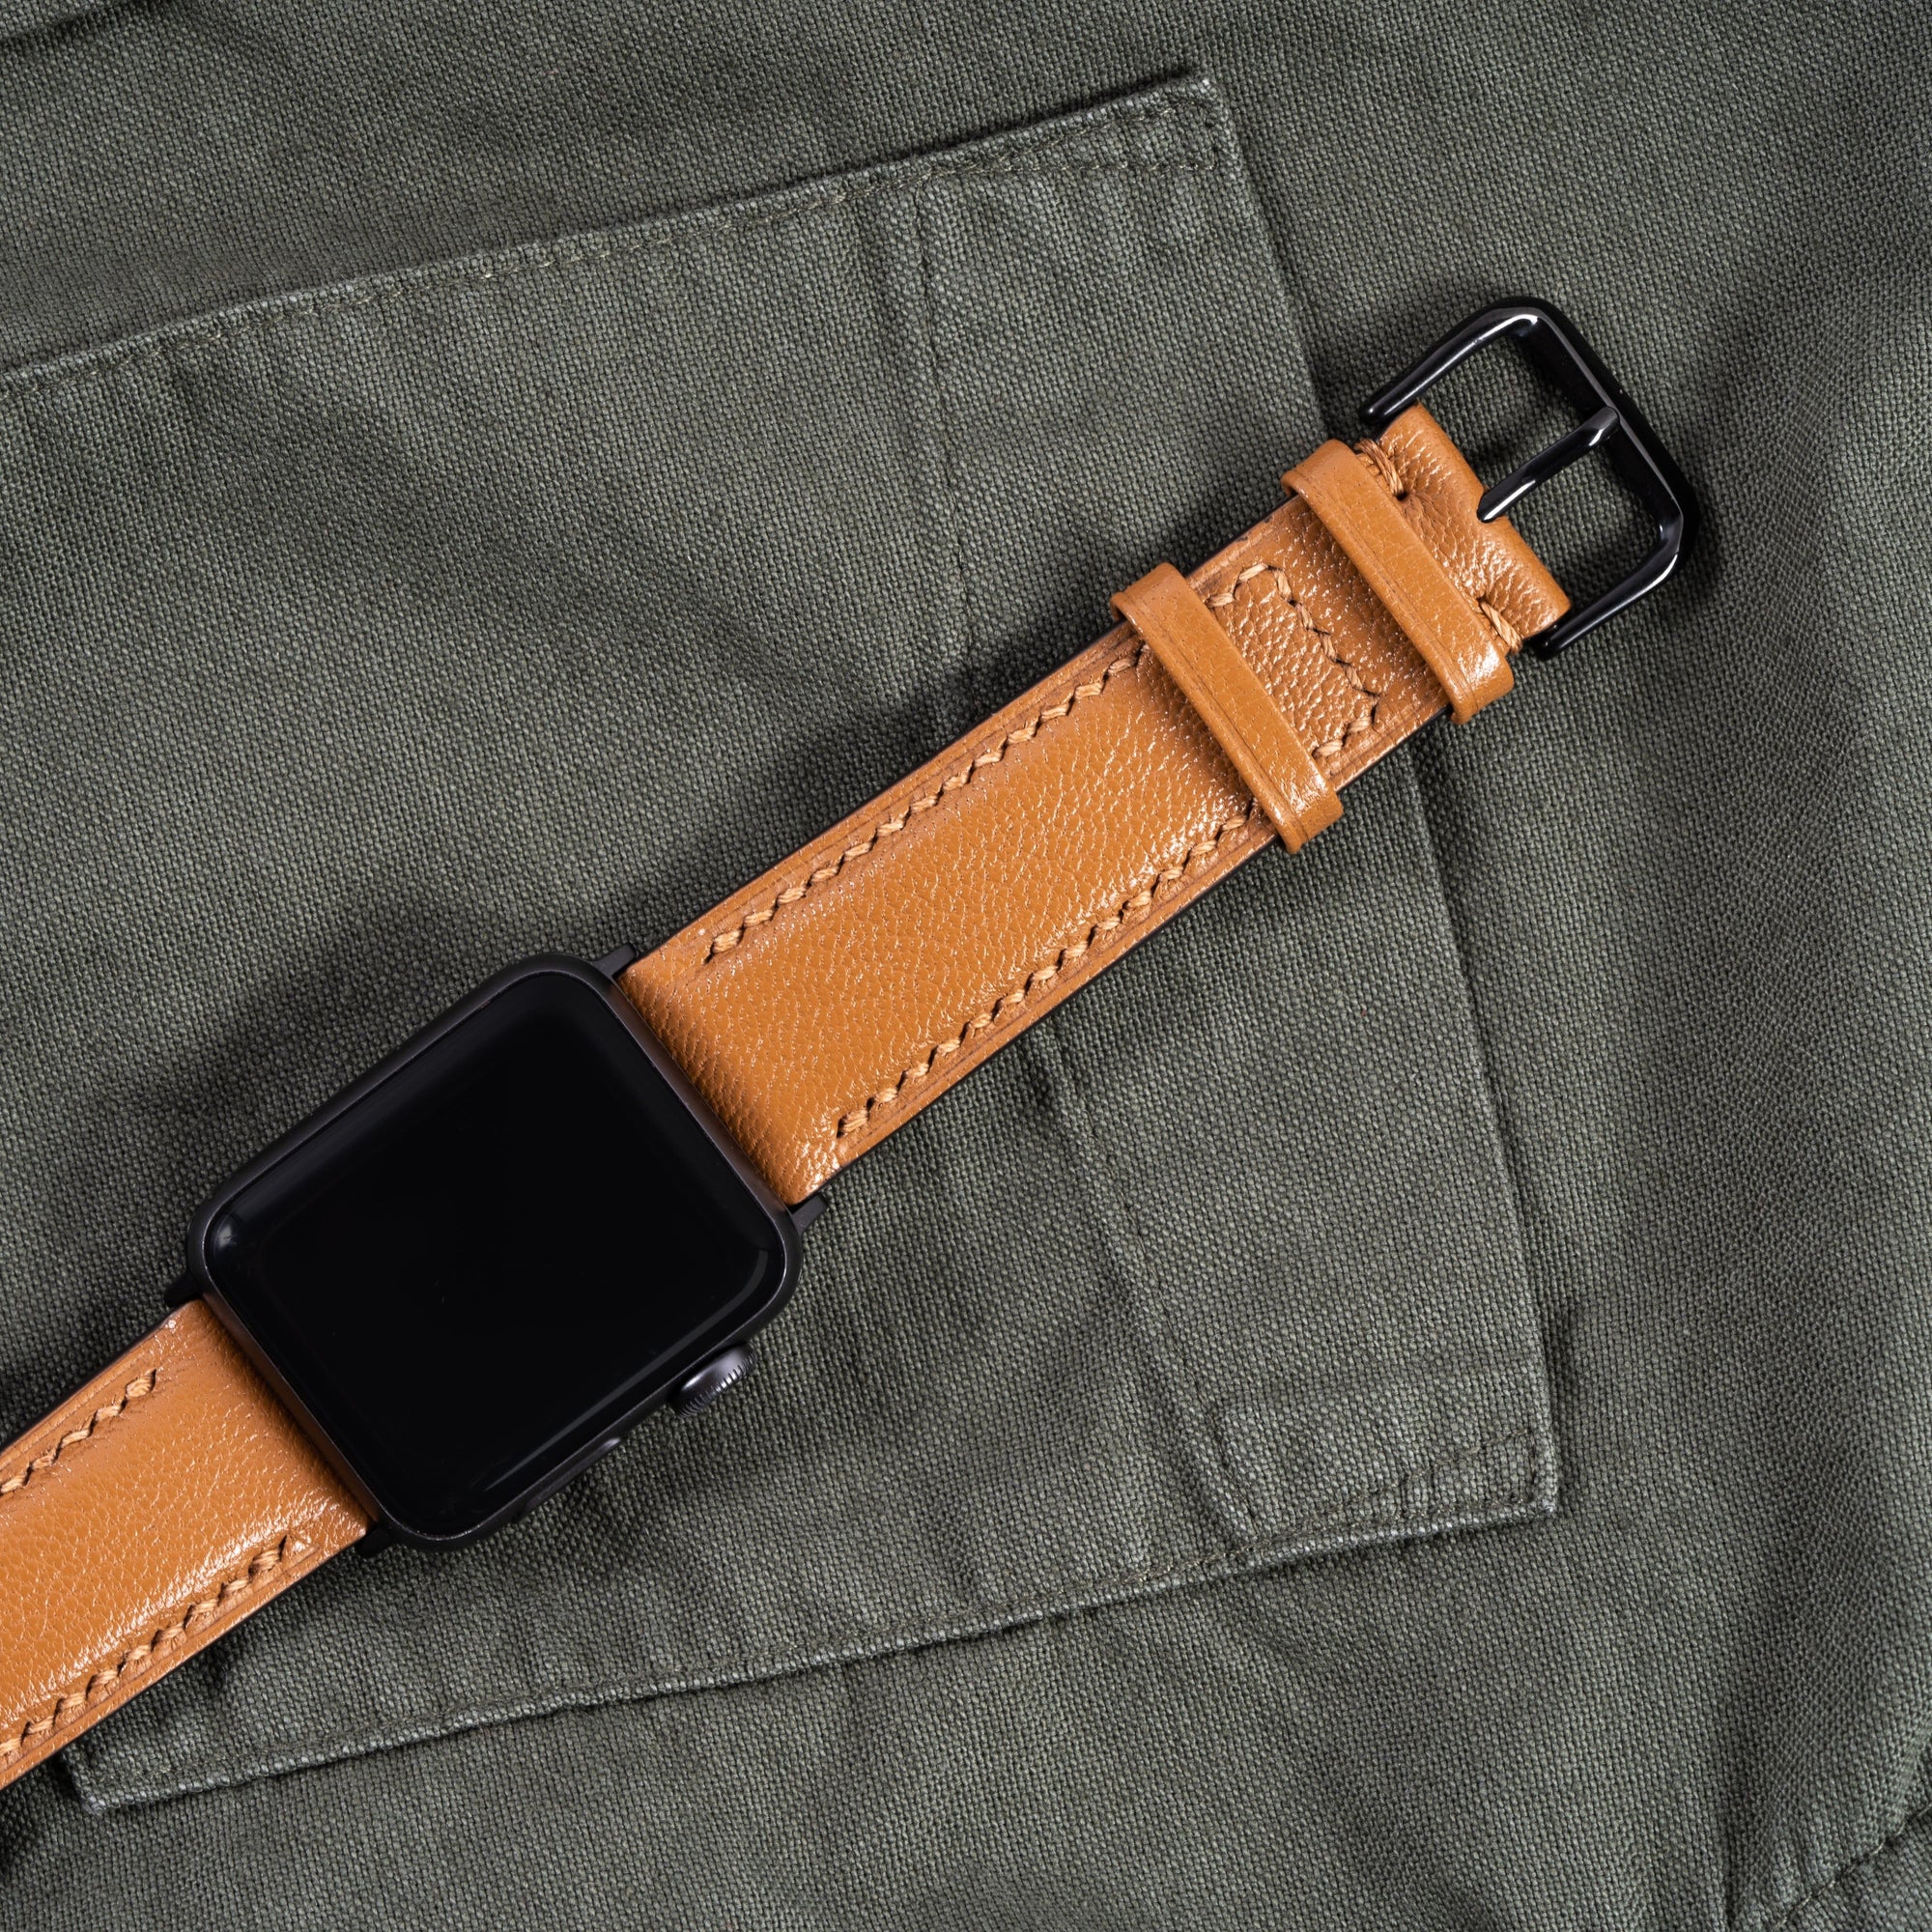 Sully Signature Leather Watch Bands For Apple Watch | Sully | Monetial